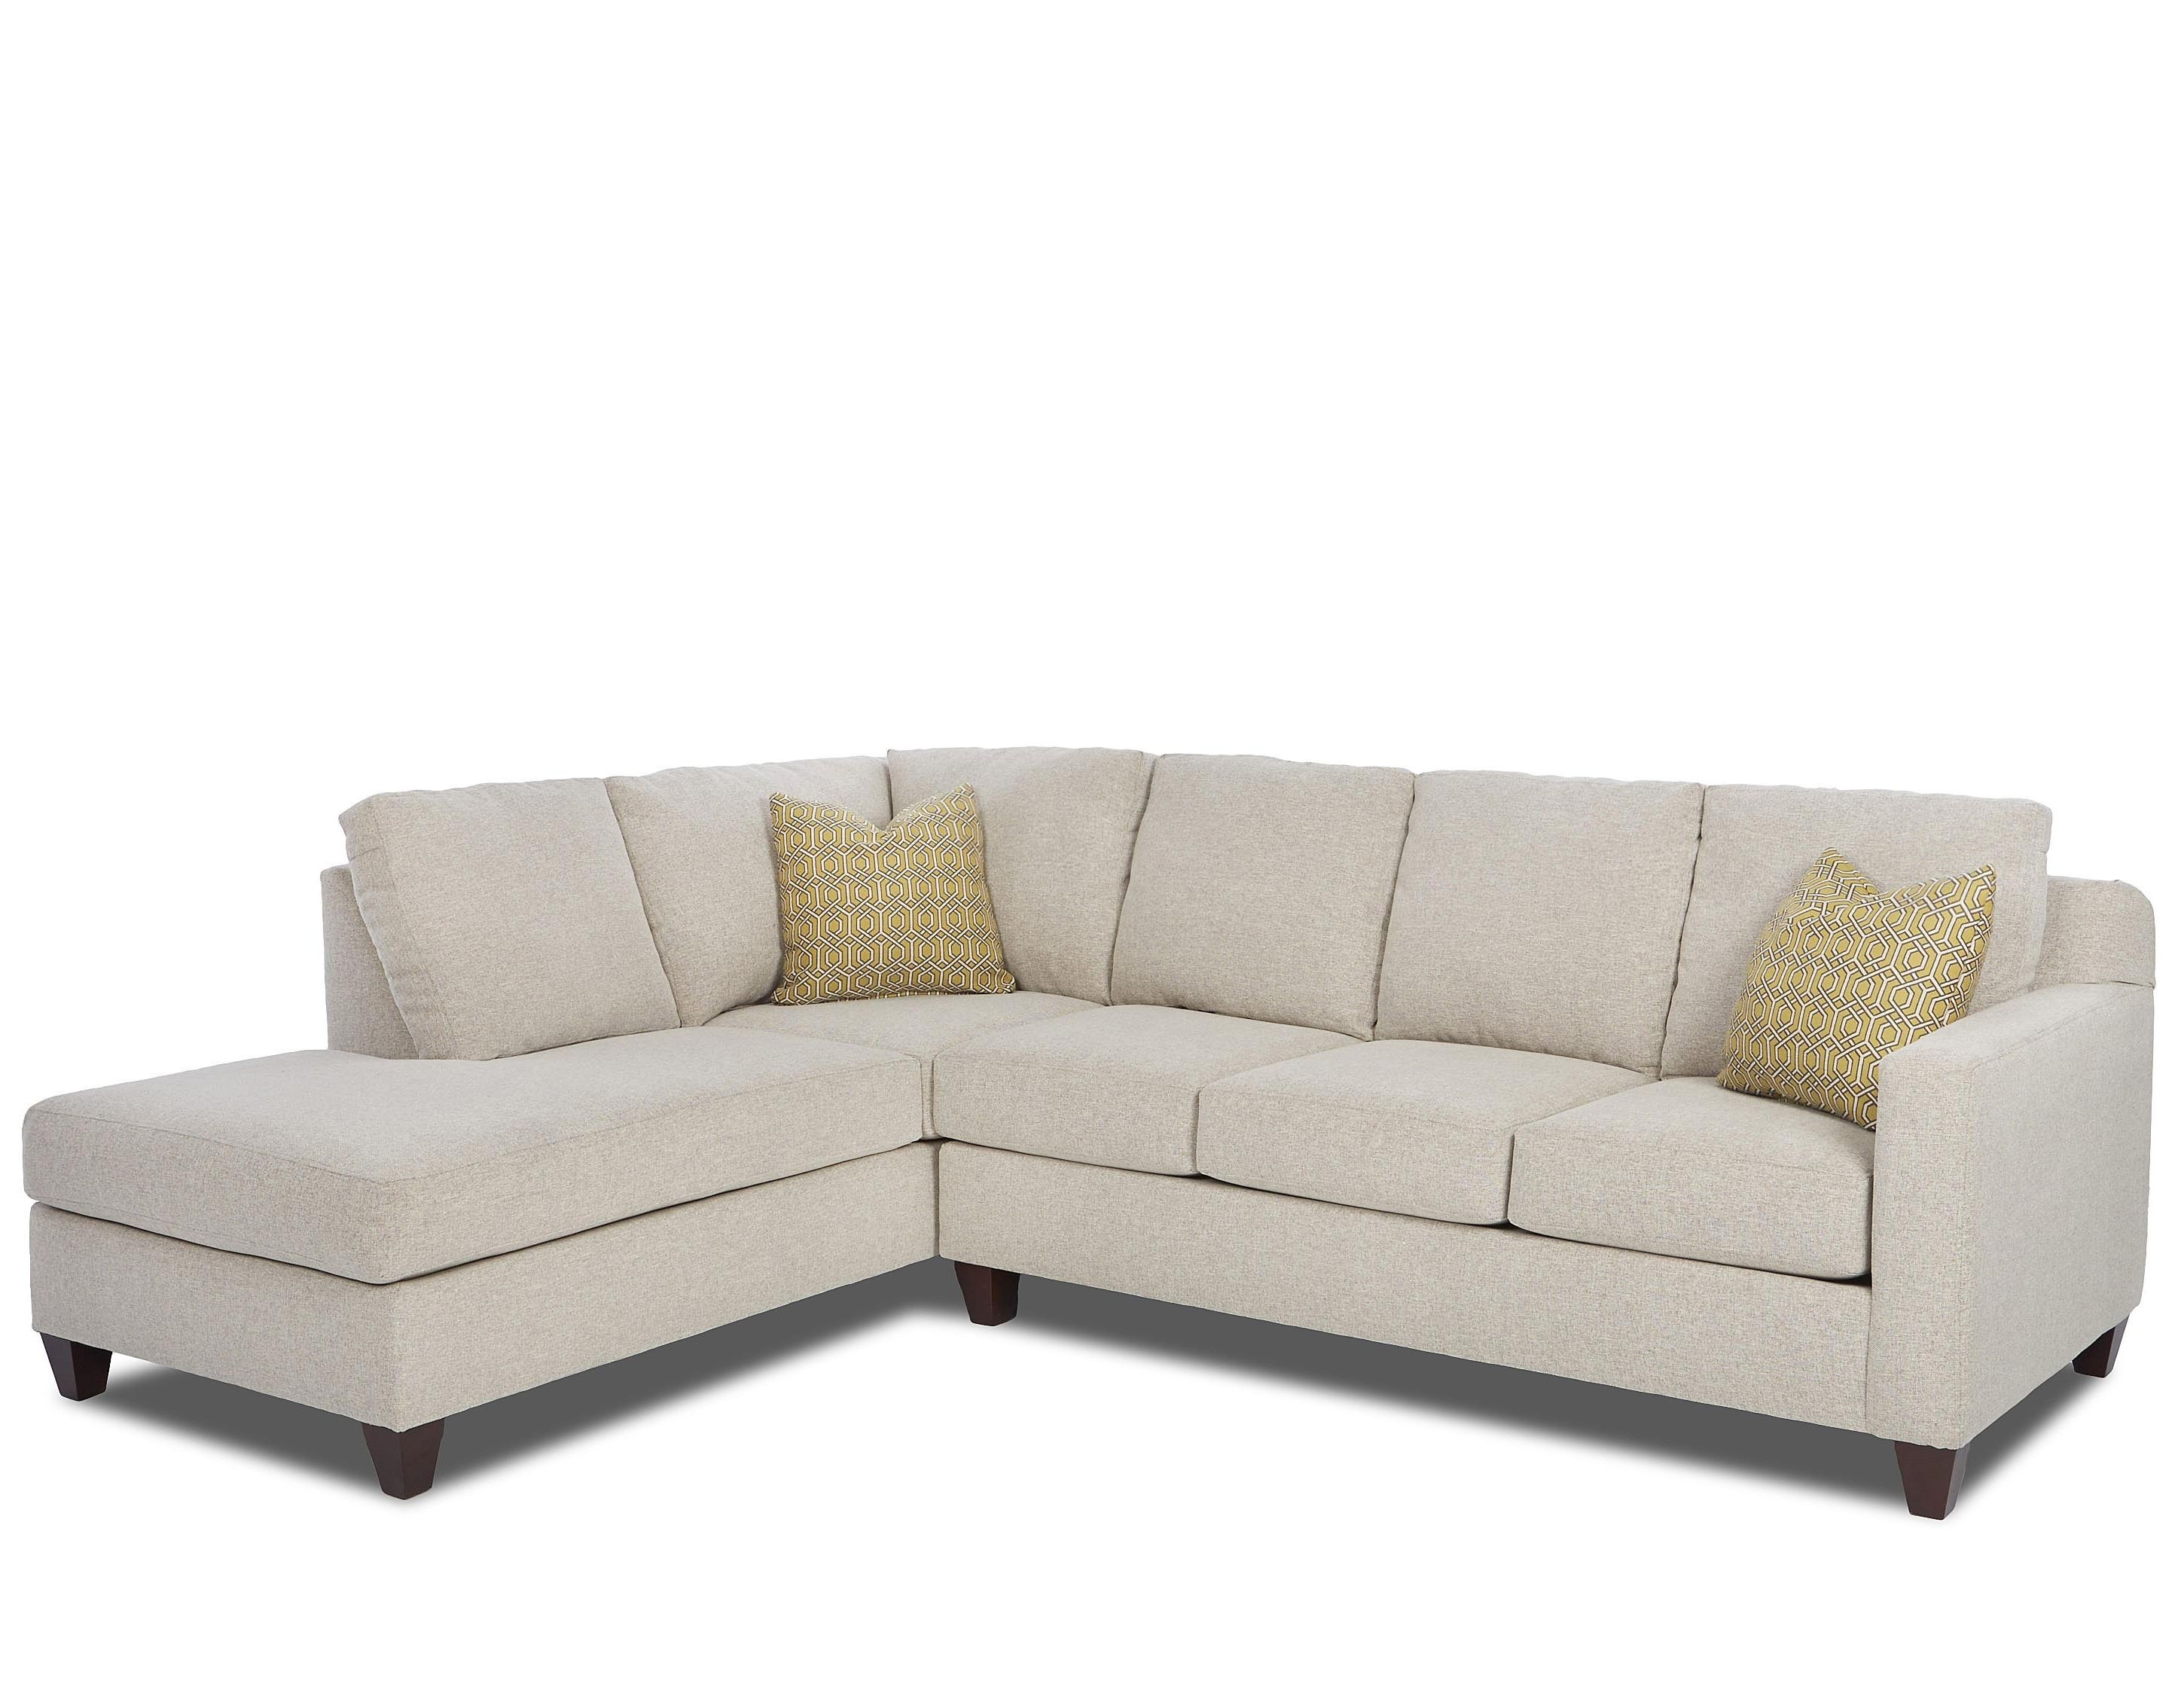 bernhardt palmer leather right facing chaise sofa